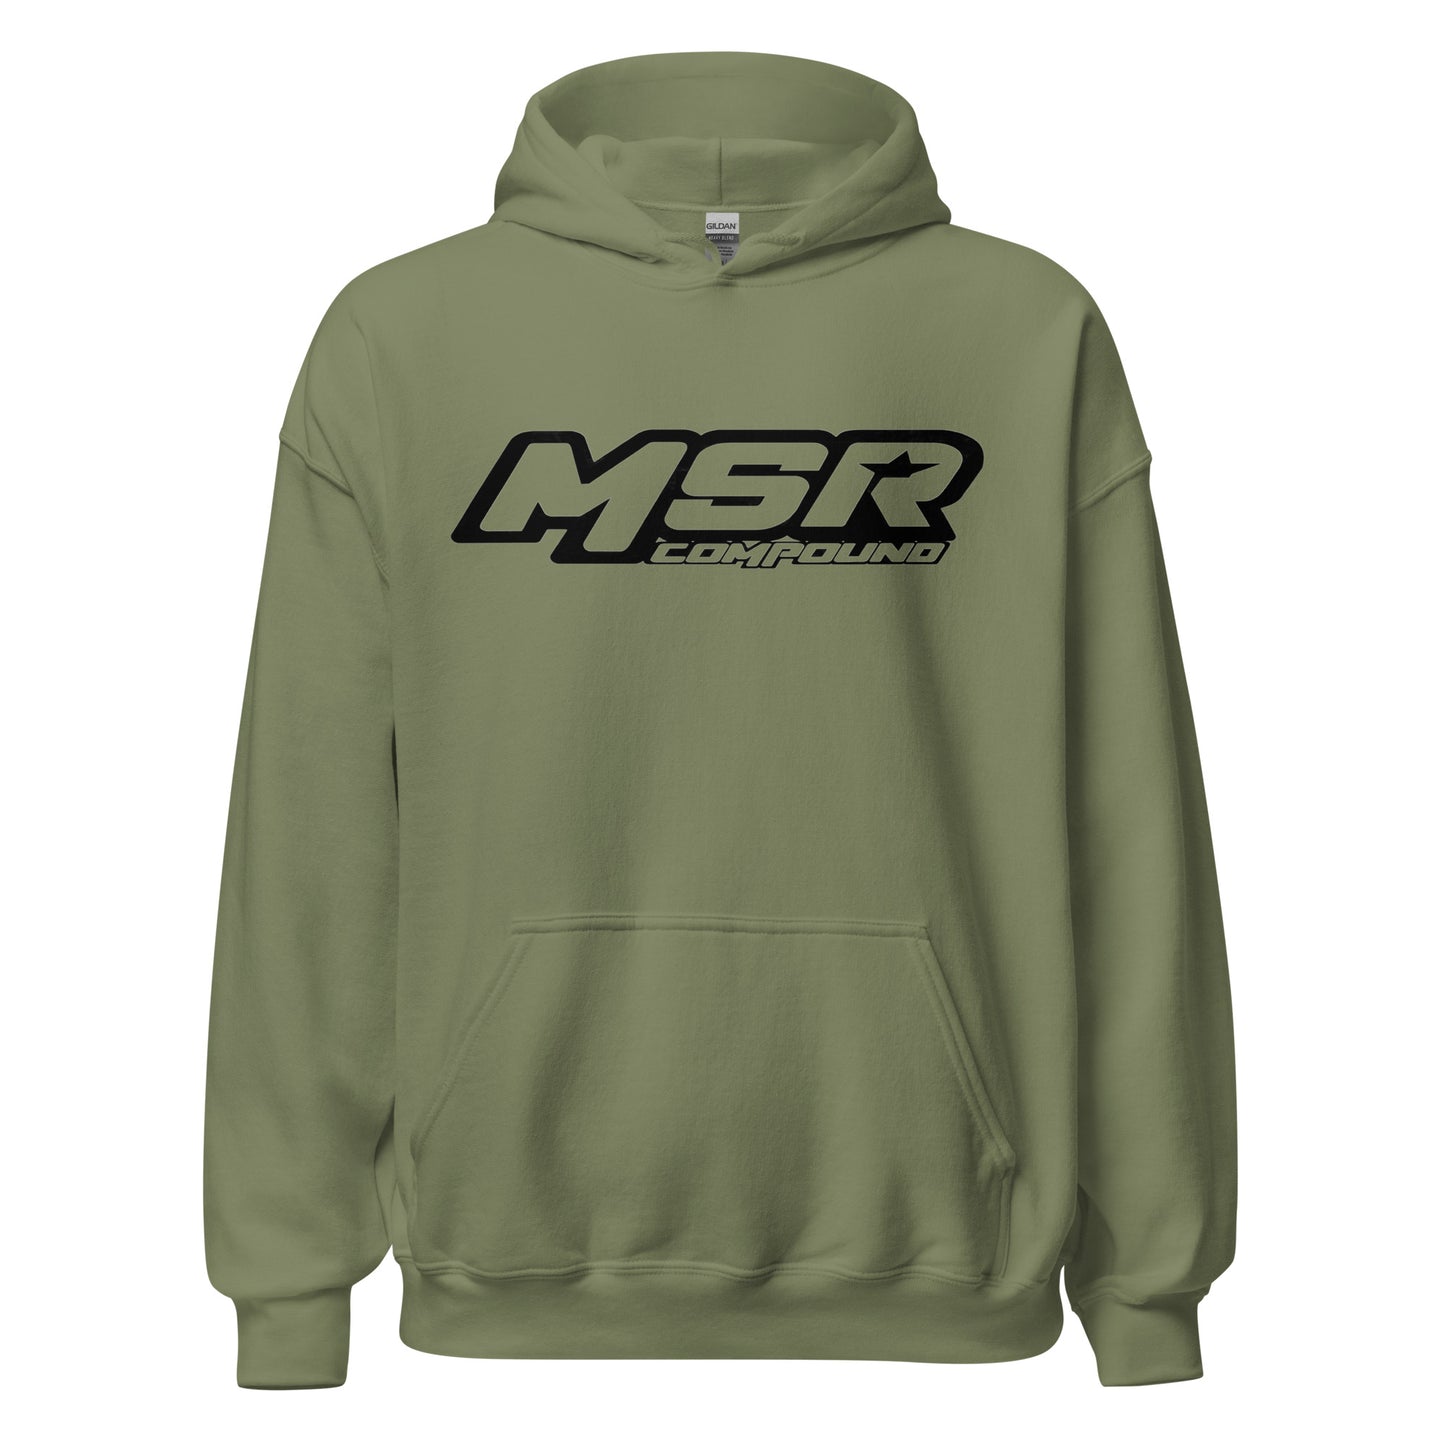 Marking Systems Unisex Hoodie